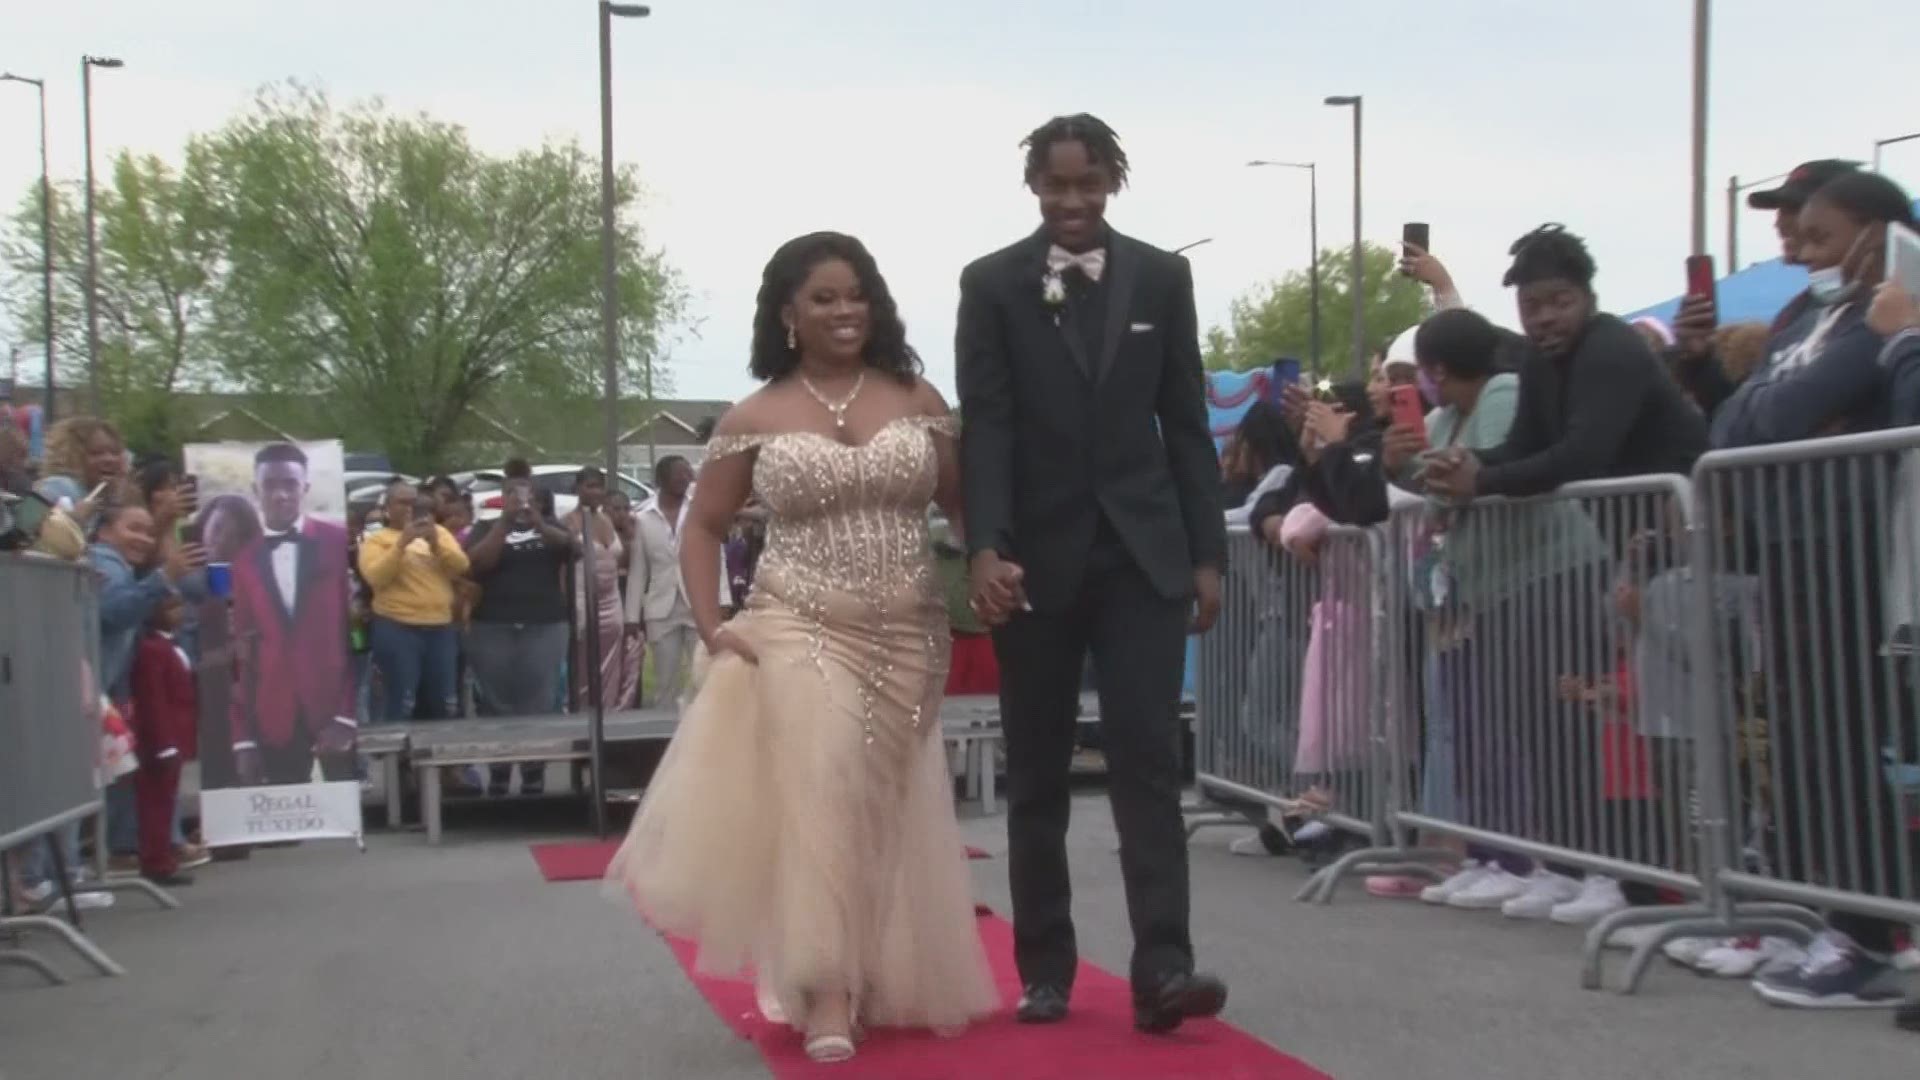 After losing five classmates in less than three months, the community came out to show their love and support to Austin East students headed to prom.